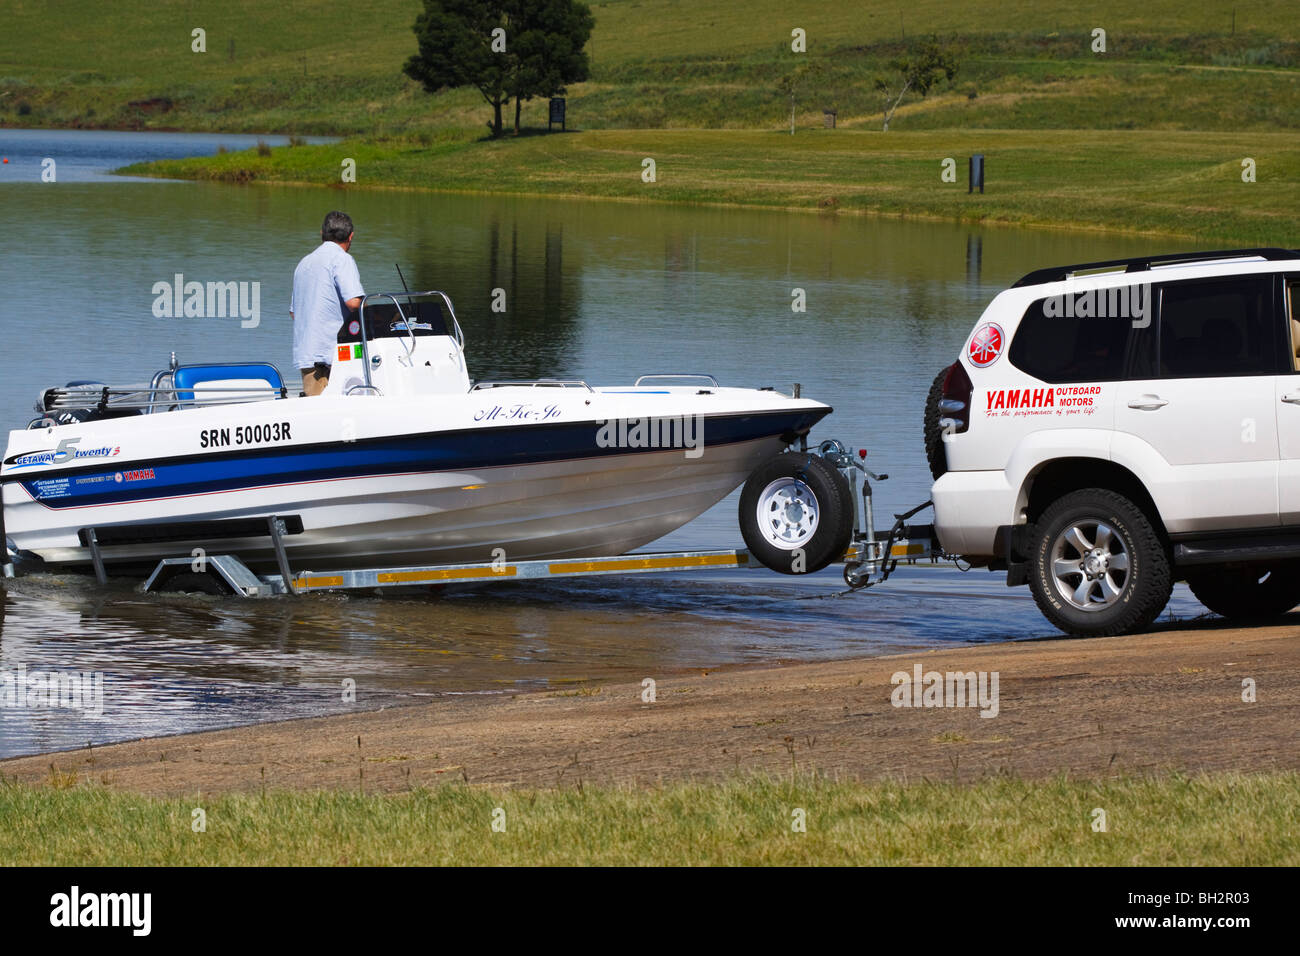 Motor boat being launched off the slip at Midmar dam, Midlands, Kwazulu Natal, South Africa. Stock Photo